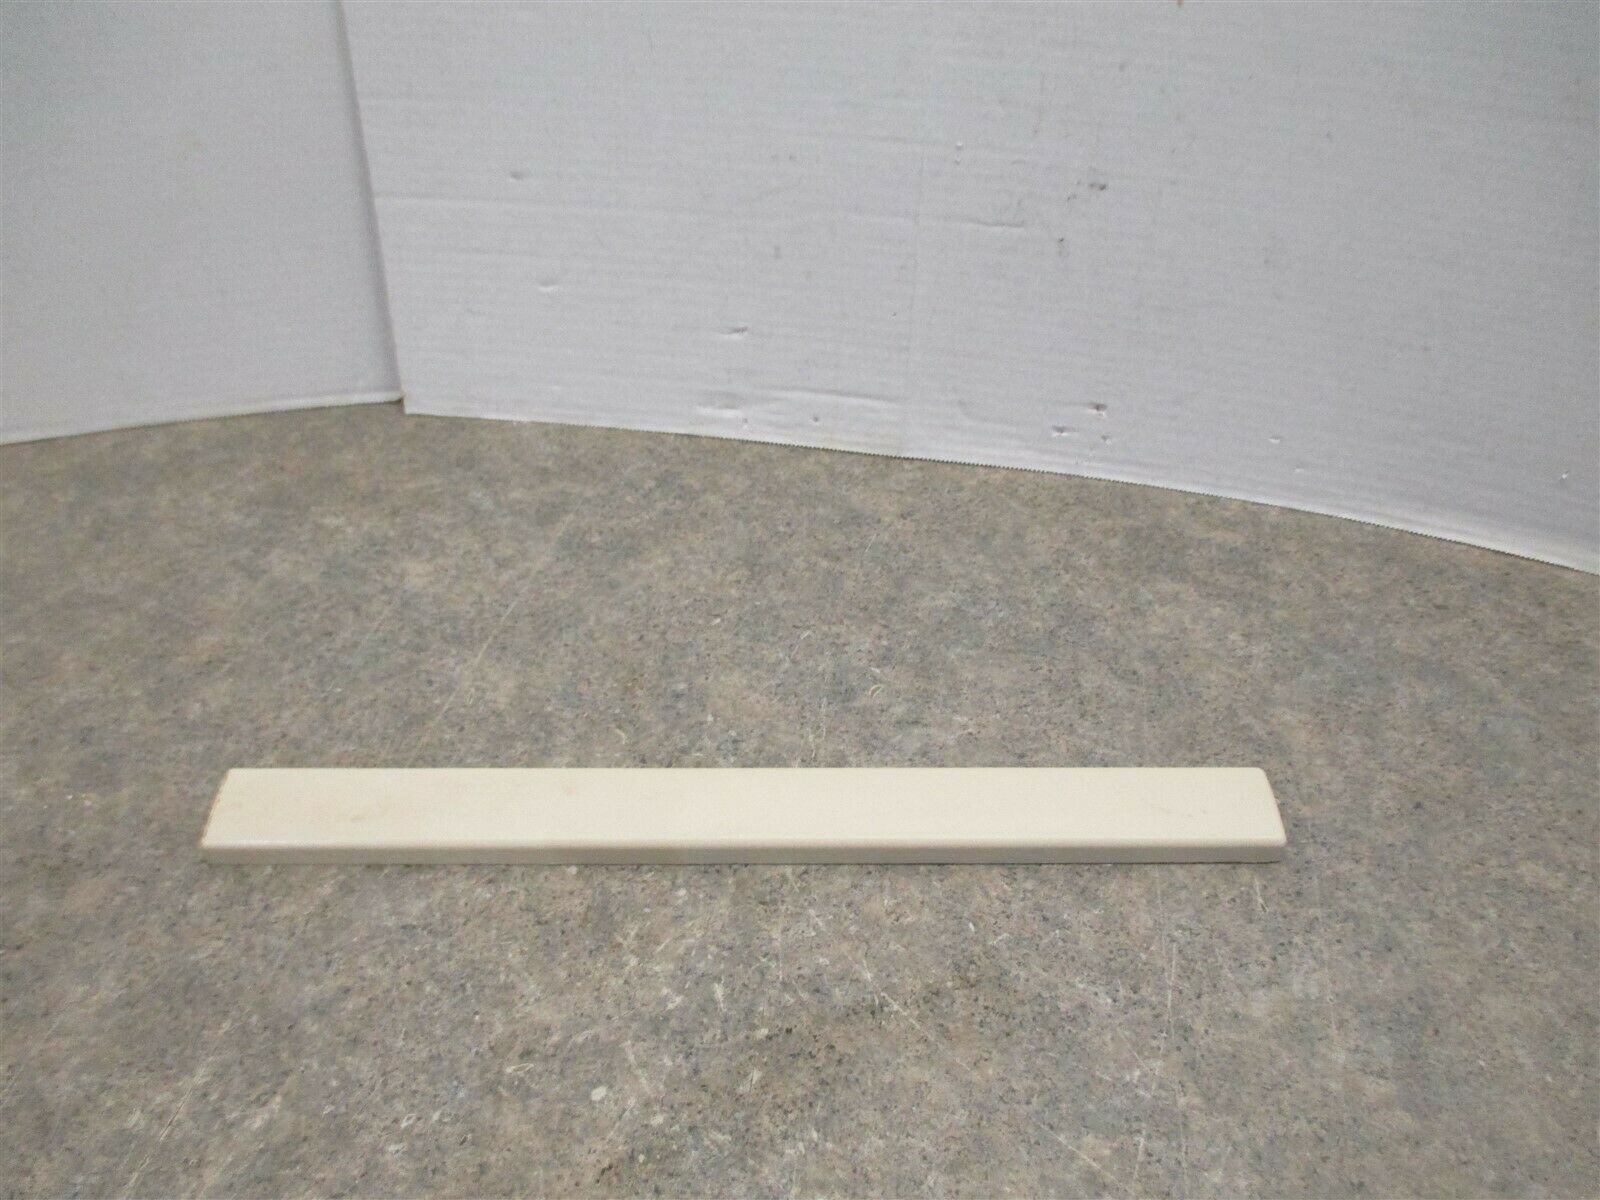 Primary image for AMANA REFRIGERATOR TOP HANDLE TRIM (SCRATCHES/ALMOND) PART# R0150132 10810310